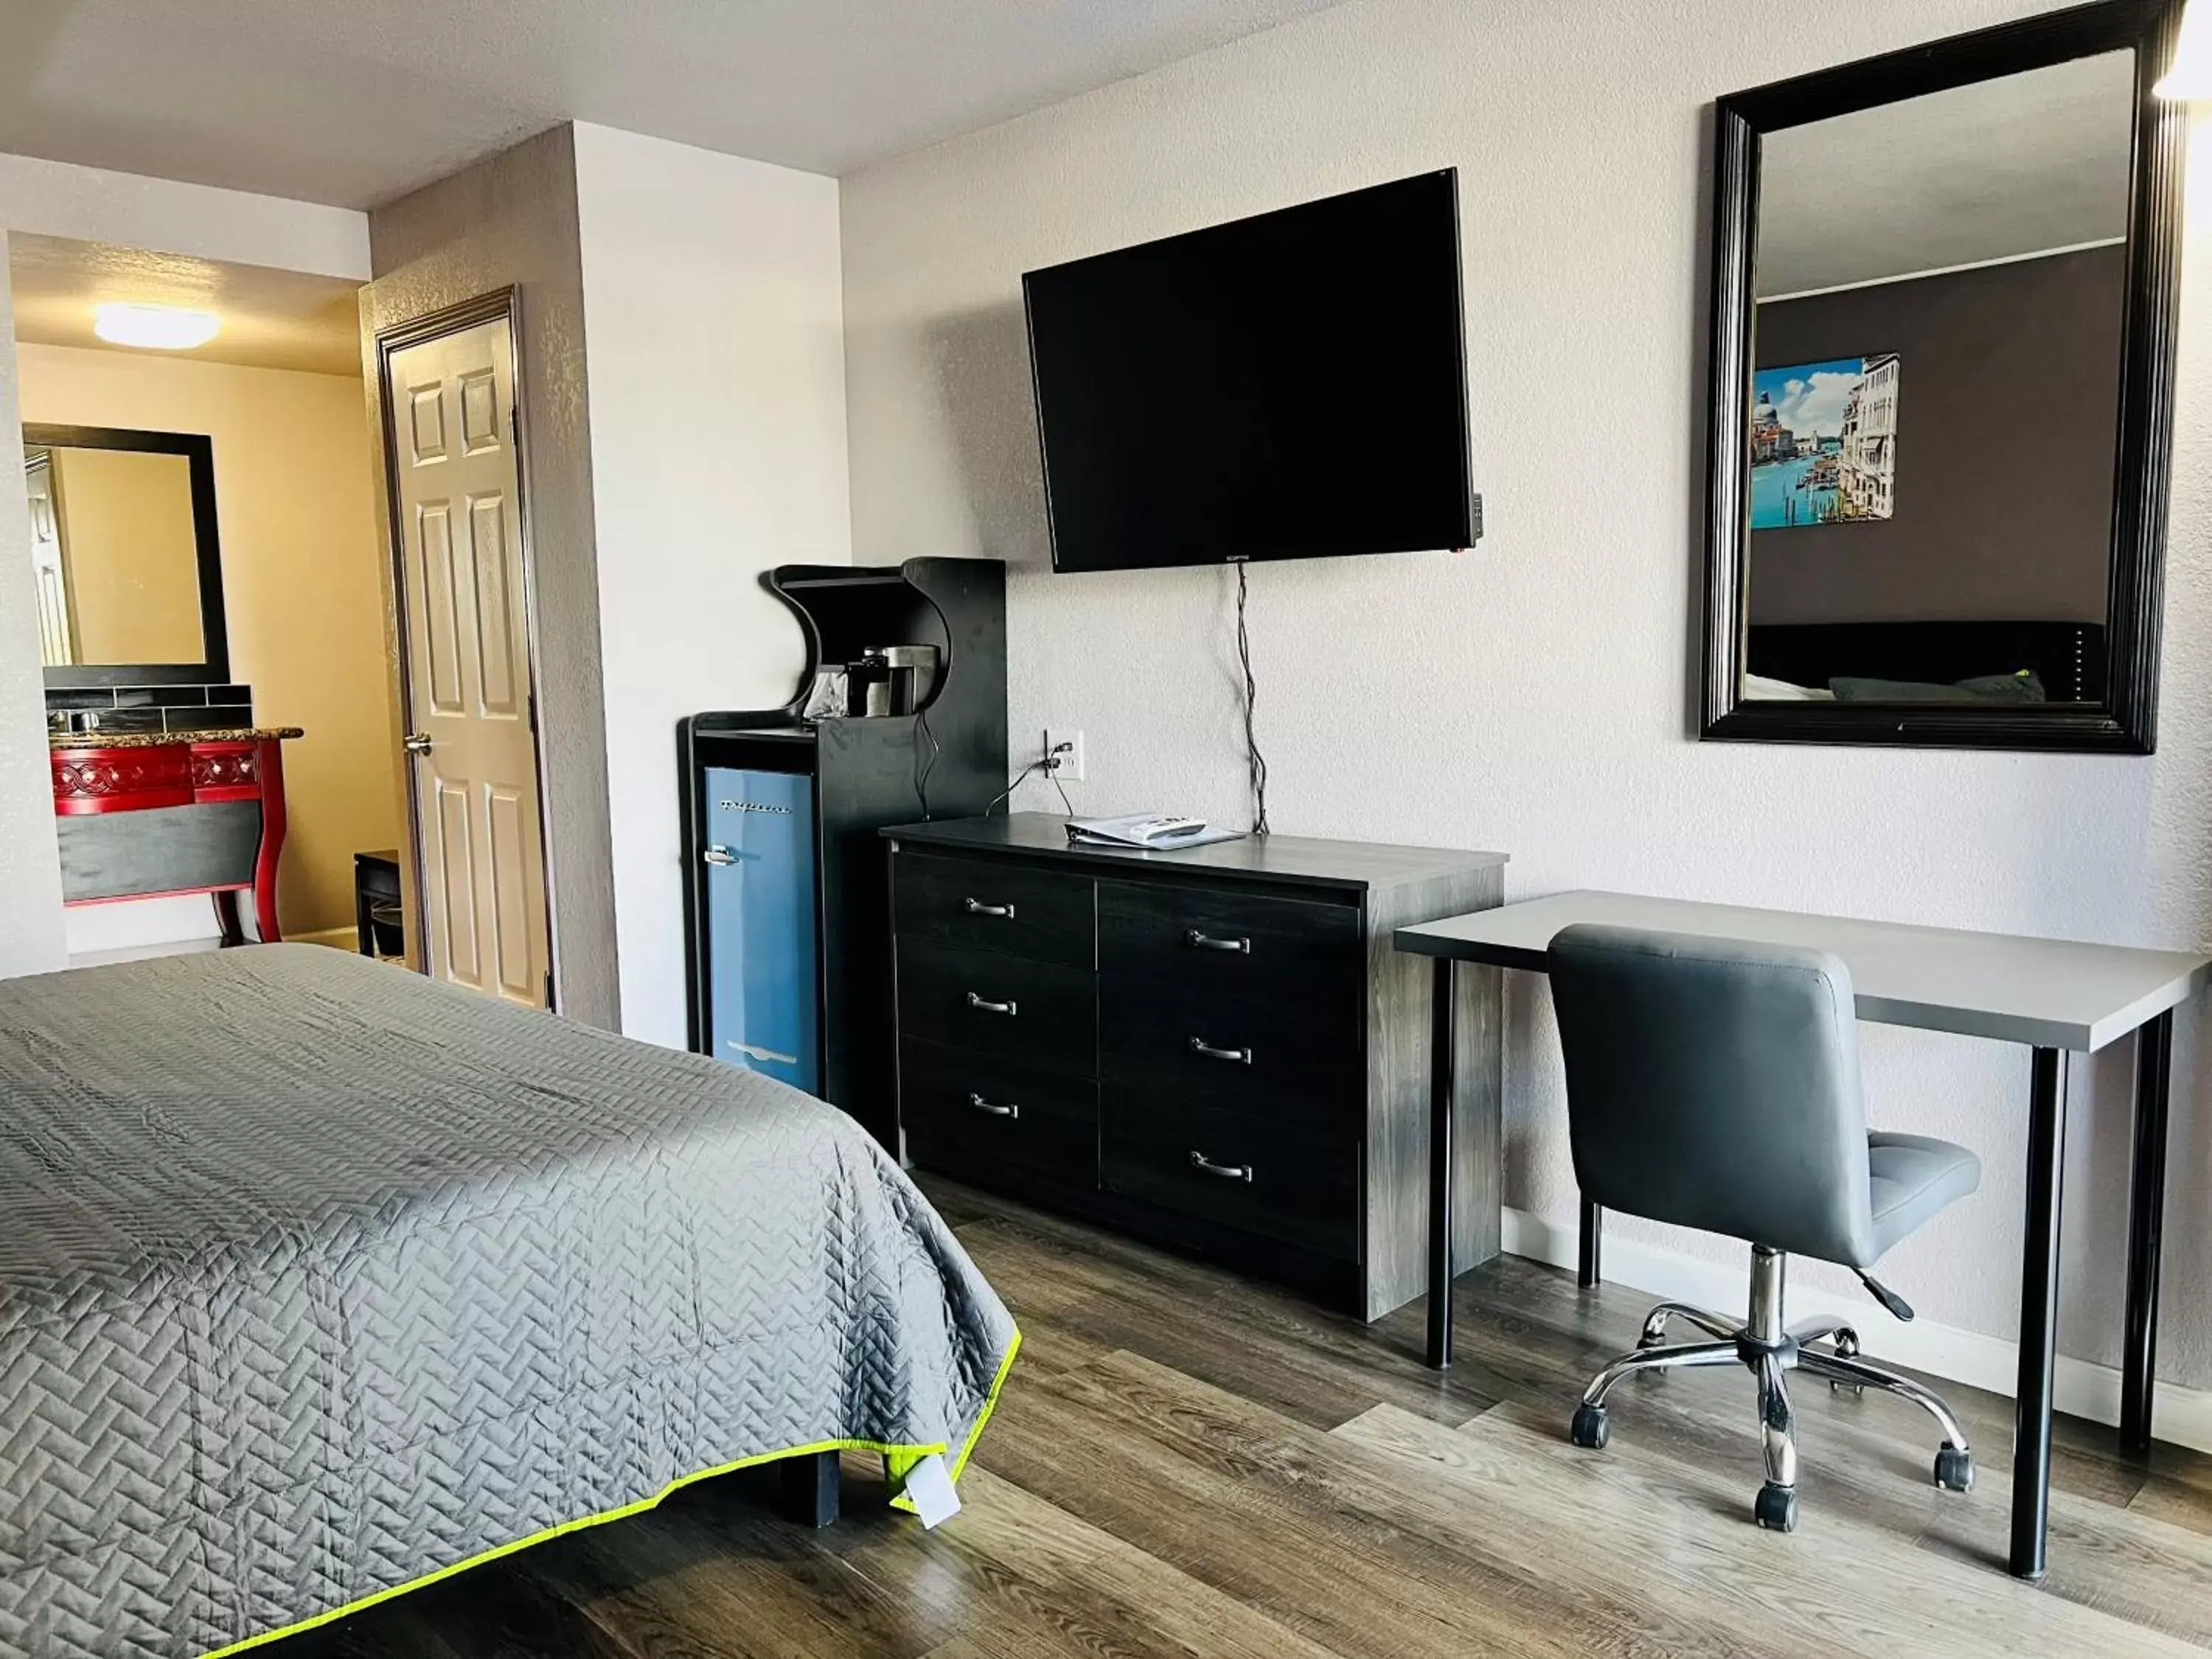 Bedroom, TV/Entertainment Center in R Nite Star Inn and Suites -Home of the Cowboys & Rangers